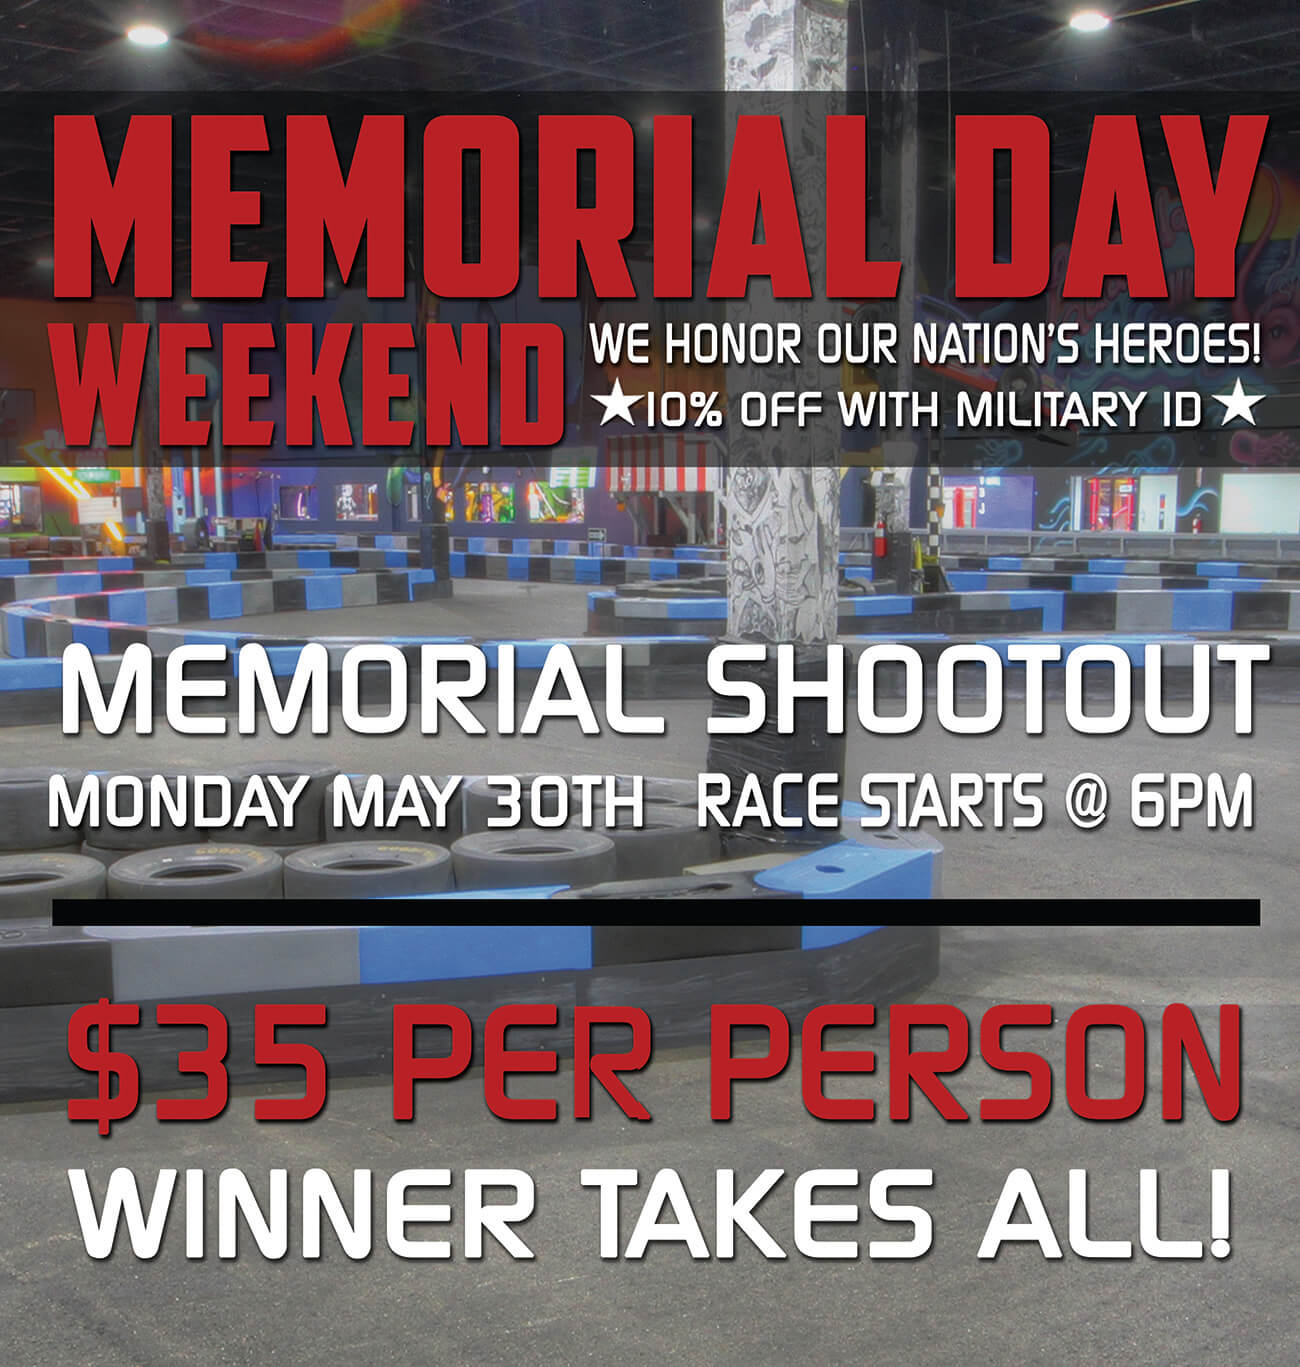 Memorial Day Shoot Out!